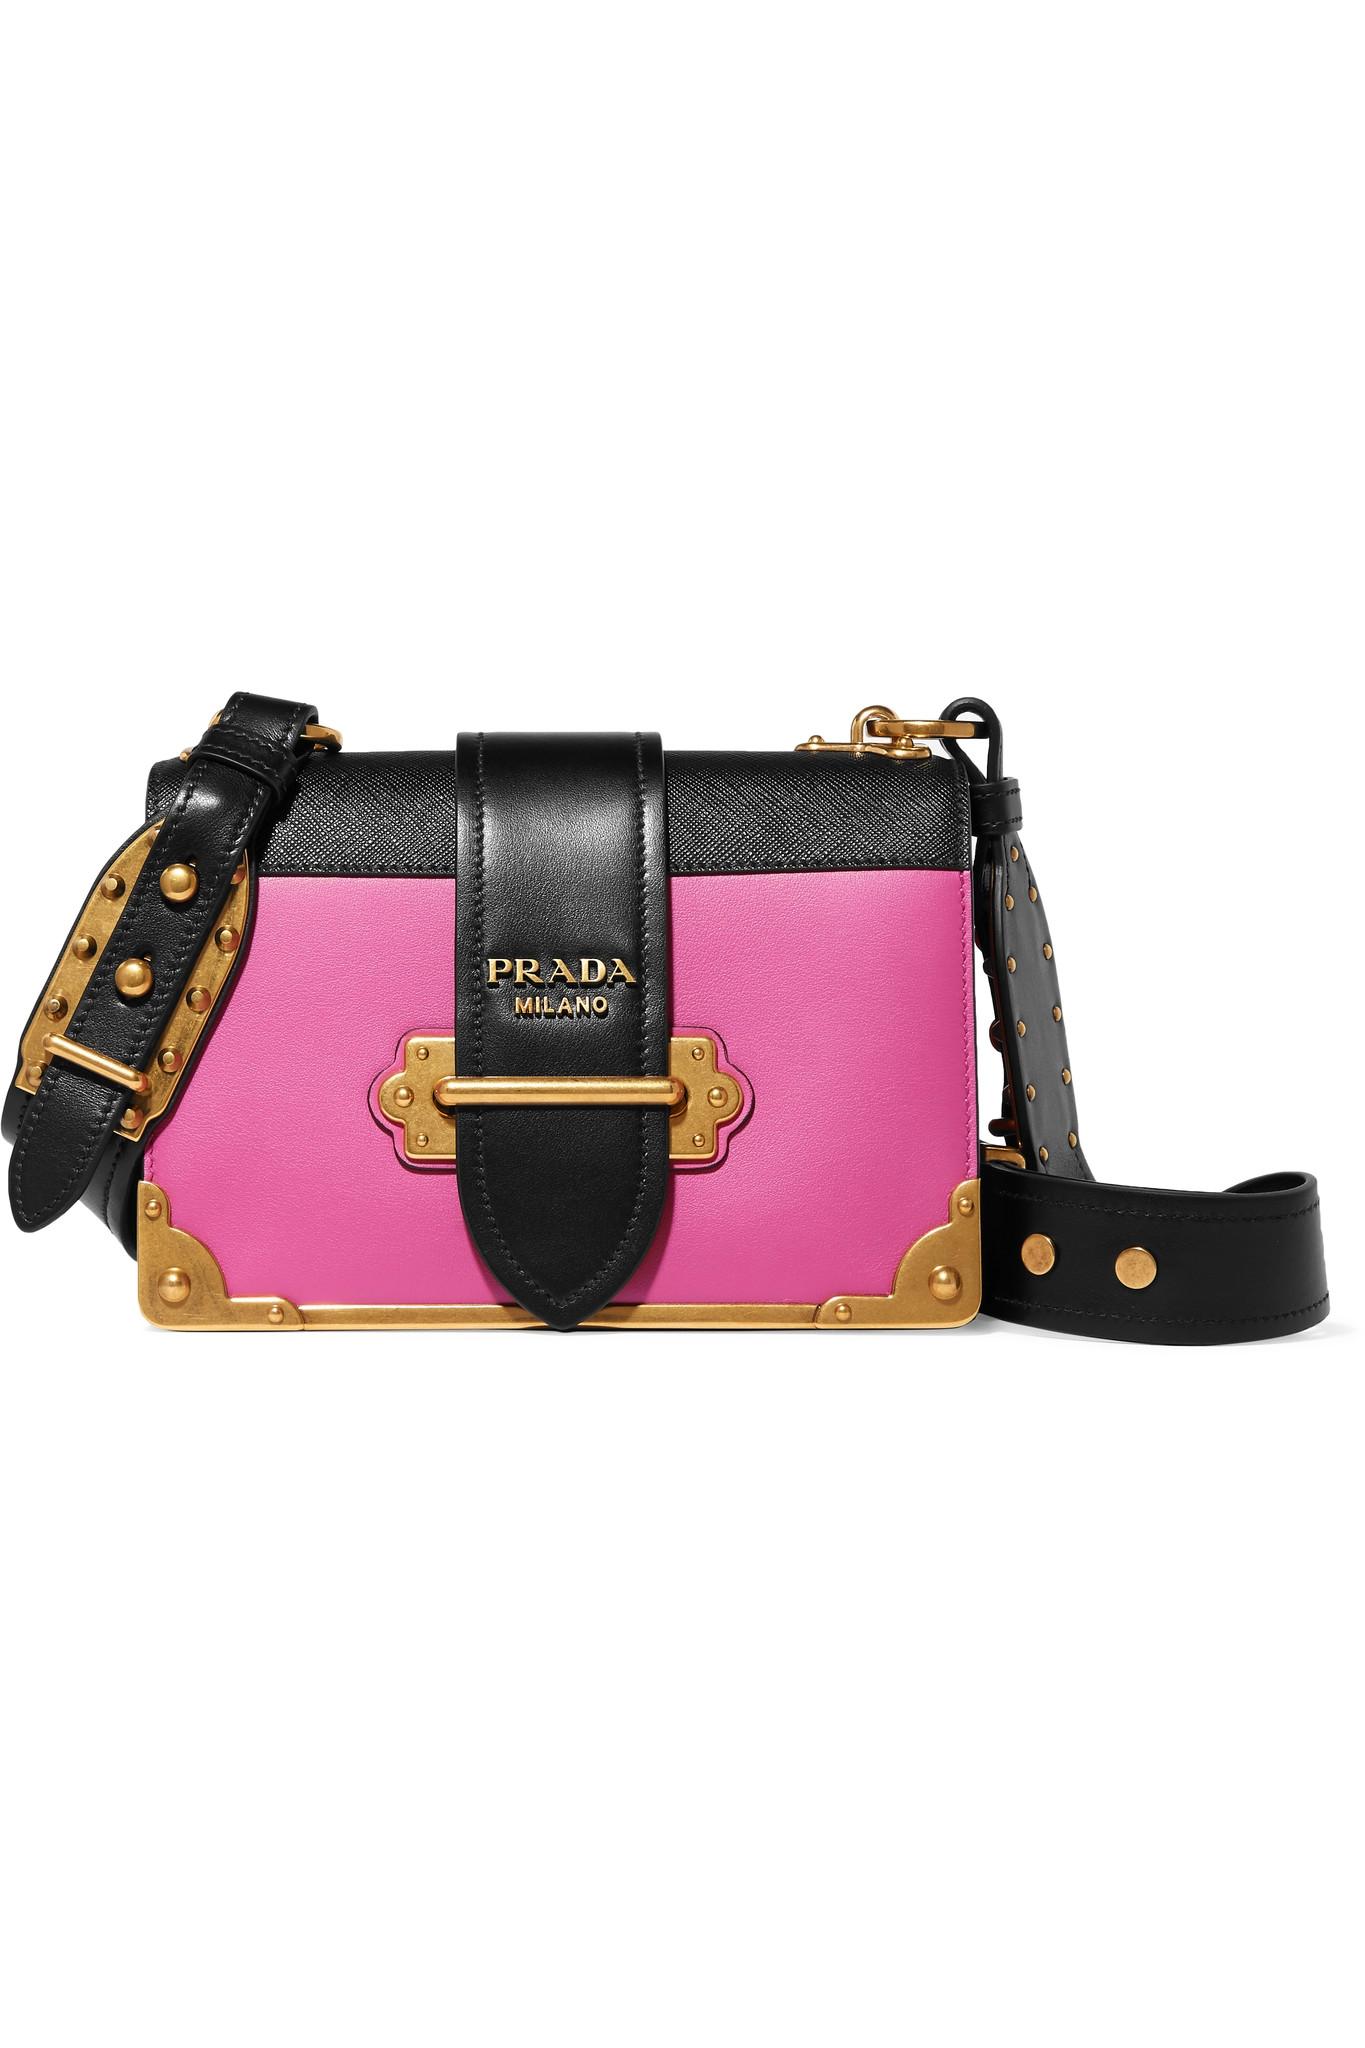 Prada Cahier Small Two-tone Leather Shoulder Bag in Pink | Lyst